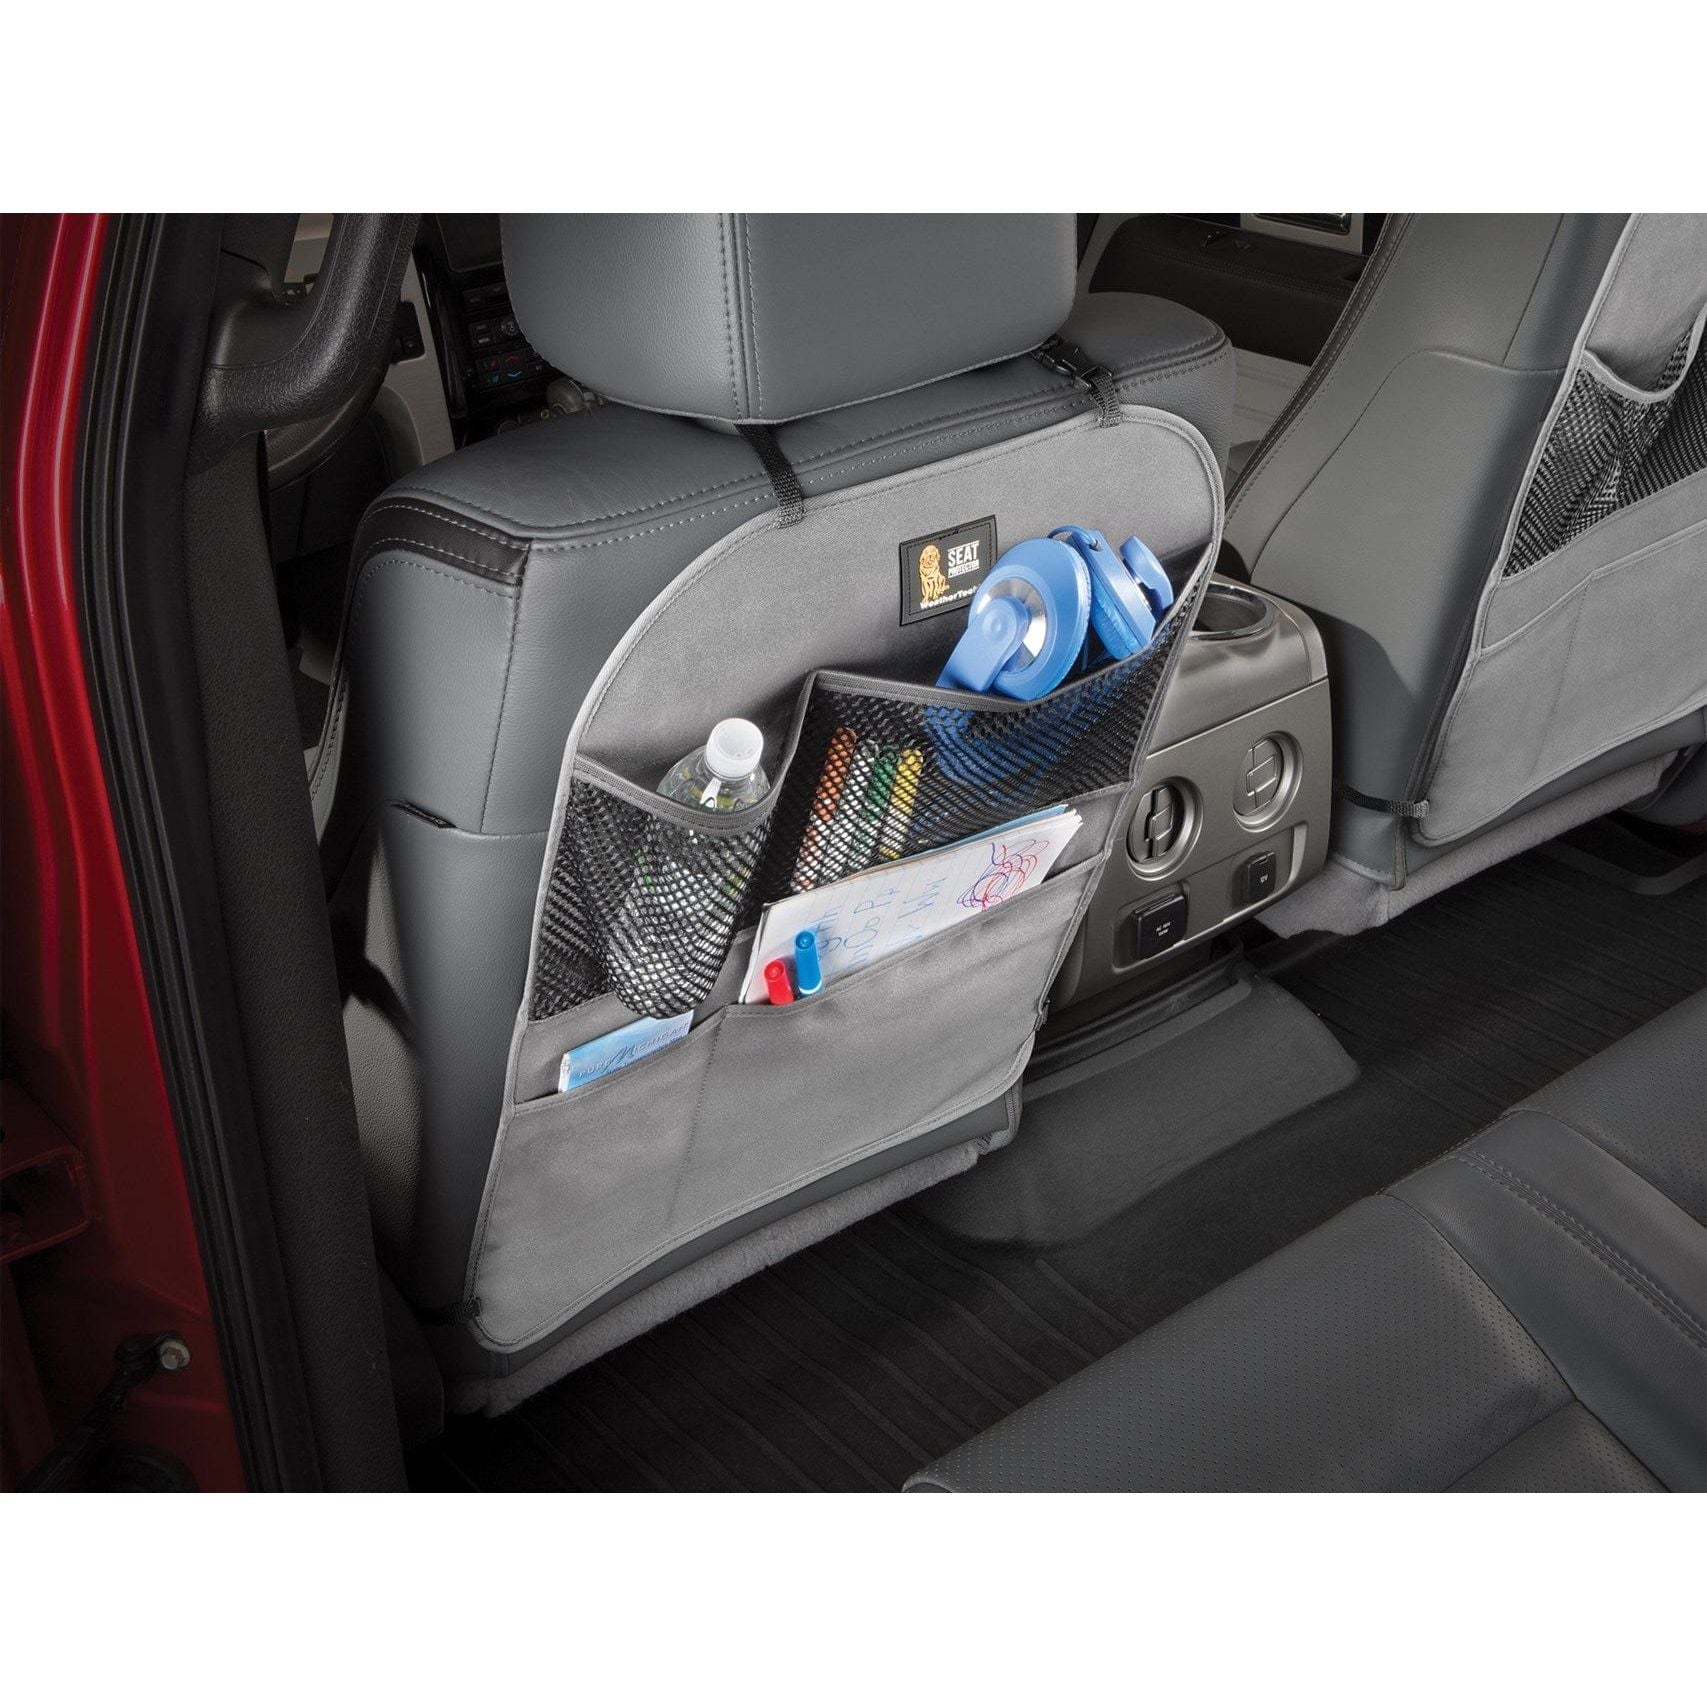 The WeatherTech Seat Back Protector in light grey, with storage for water bottles, headphones and childrens in car items.